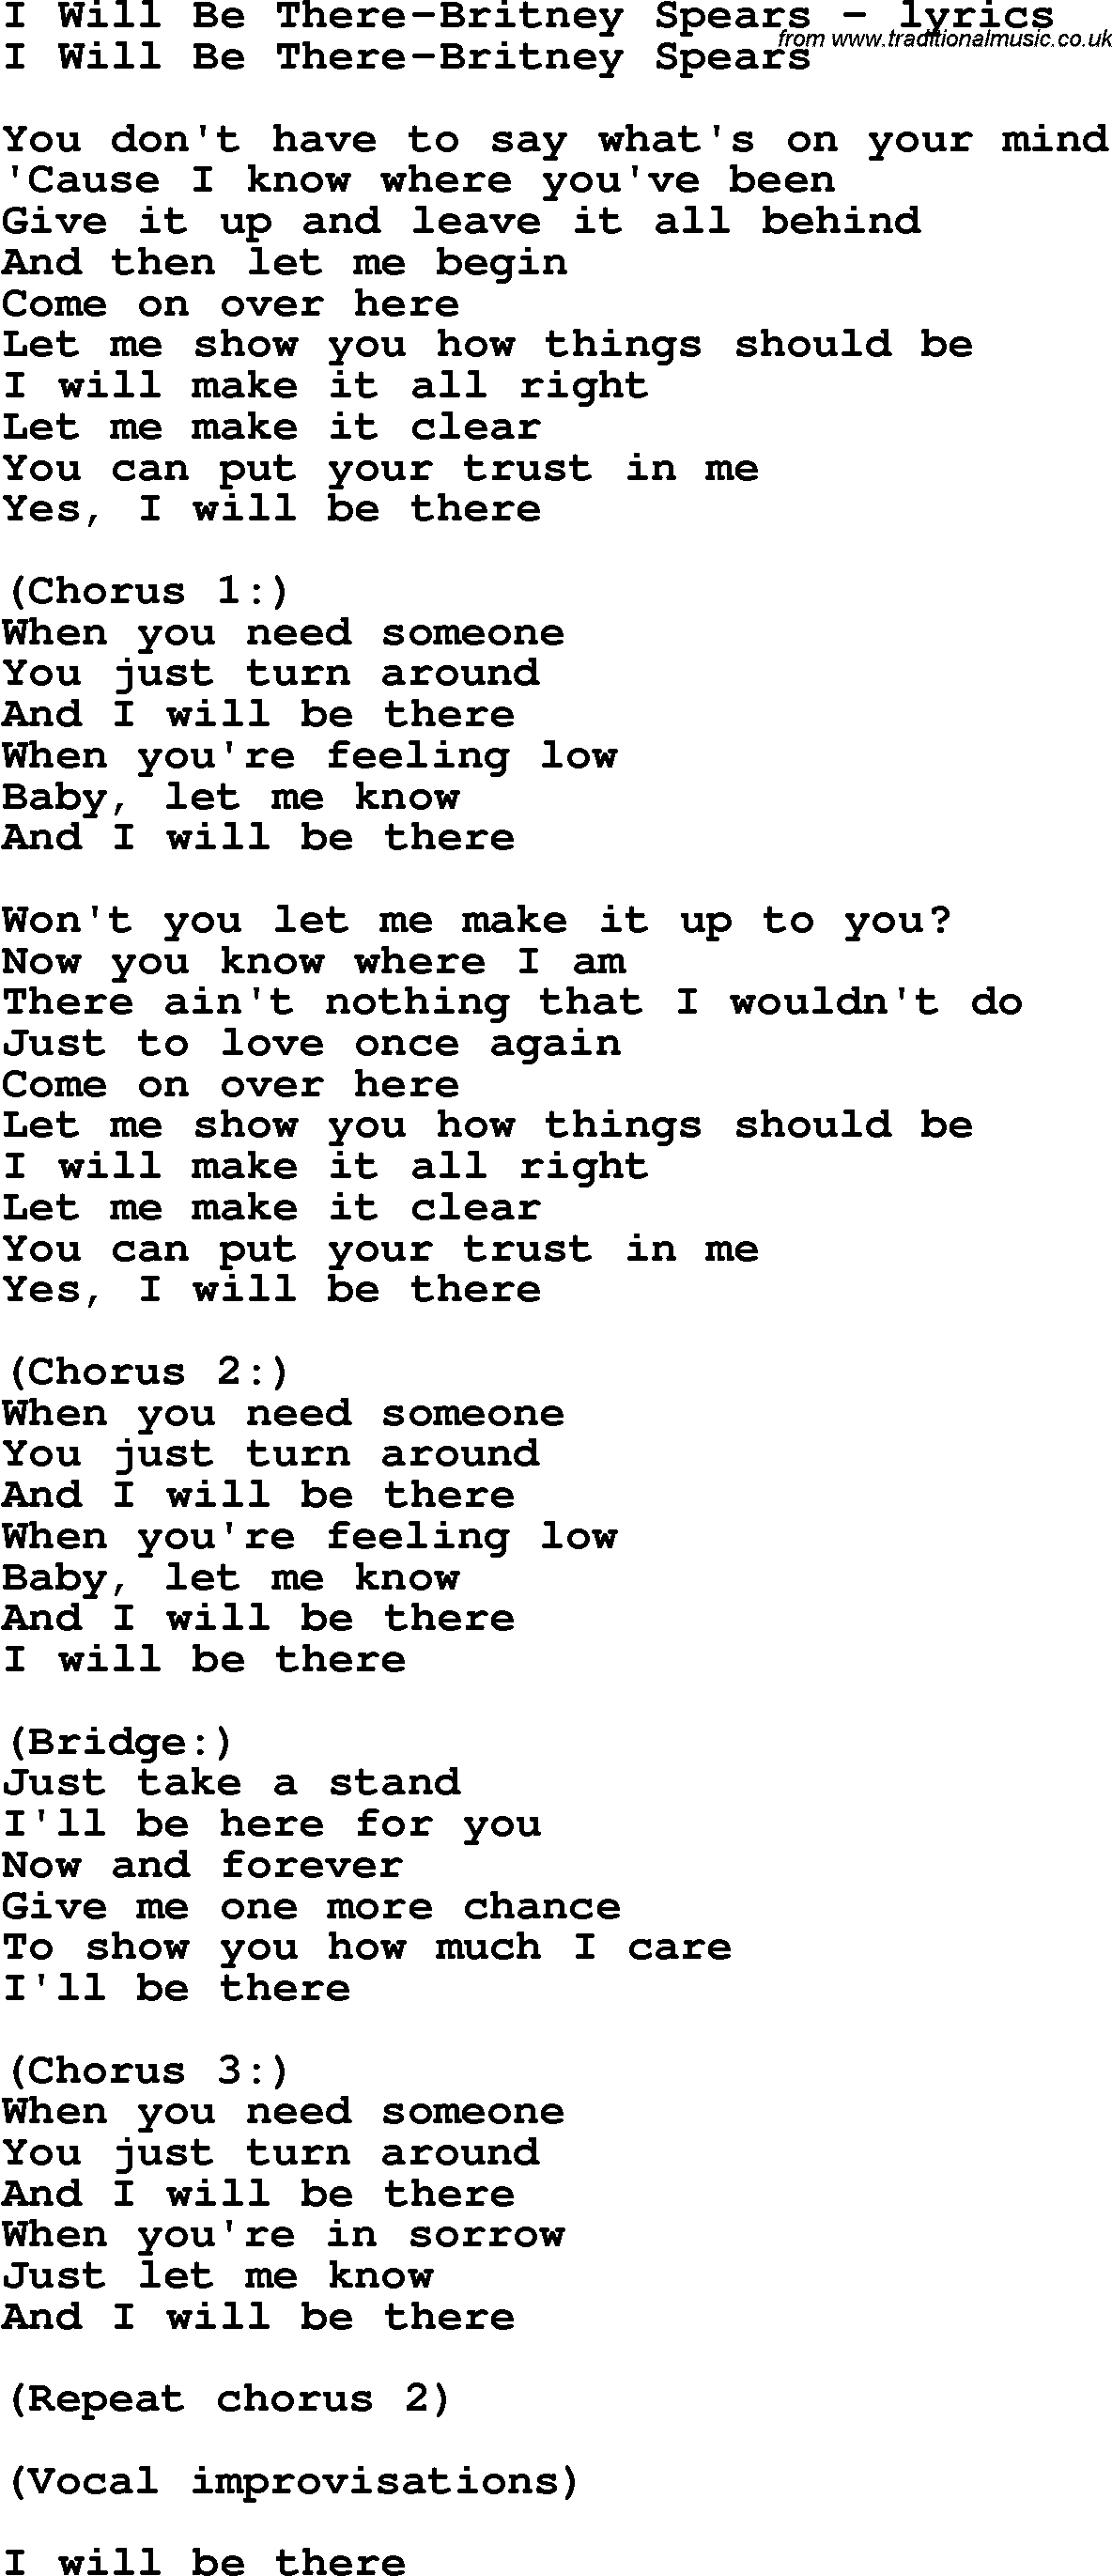 Love Song Lyrics for: I Will Be There-Britney Spears